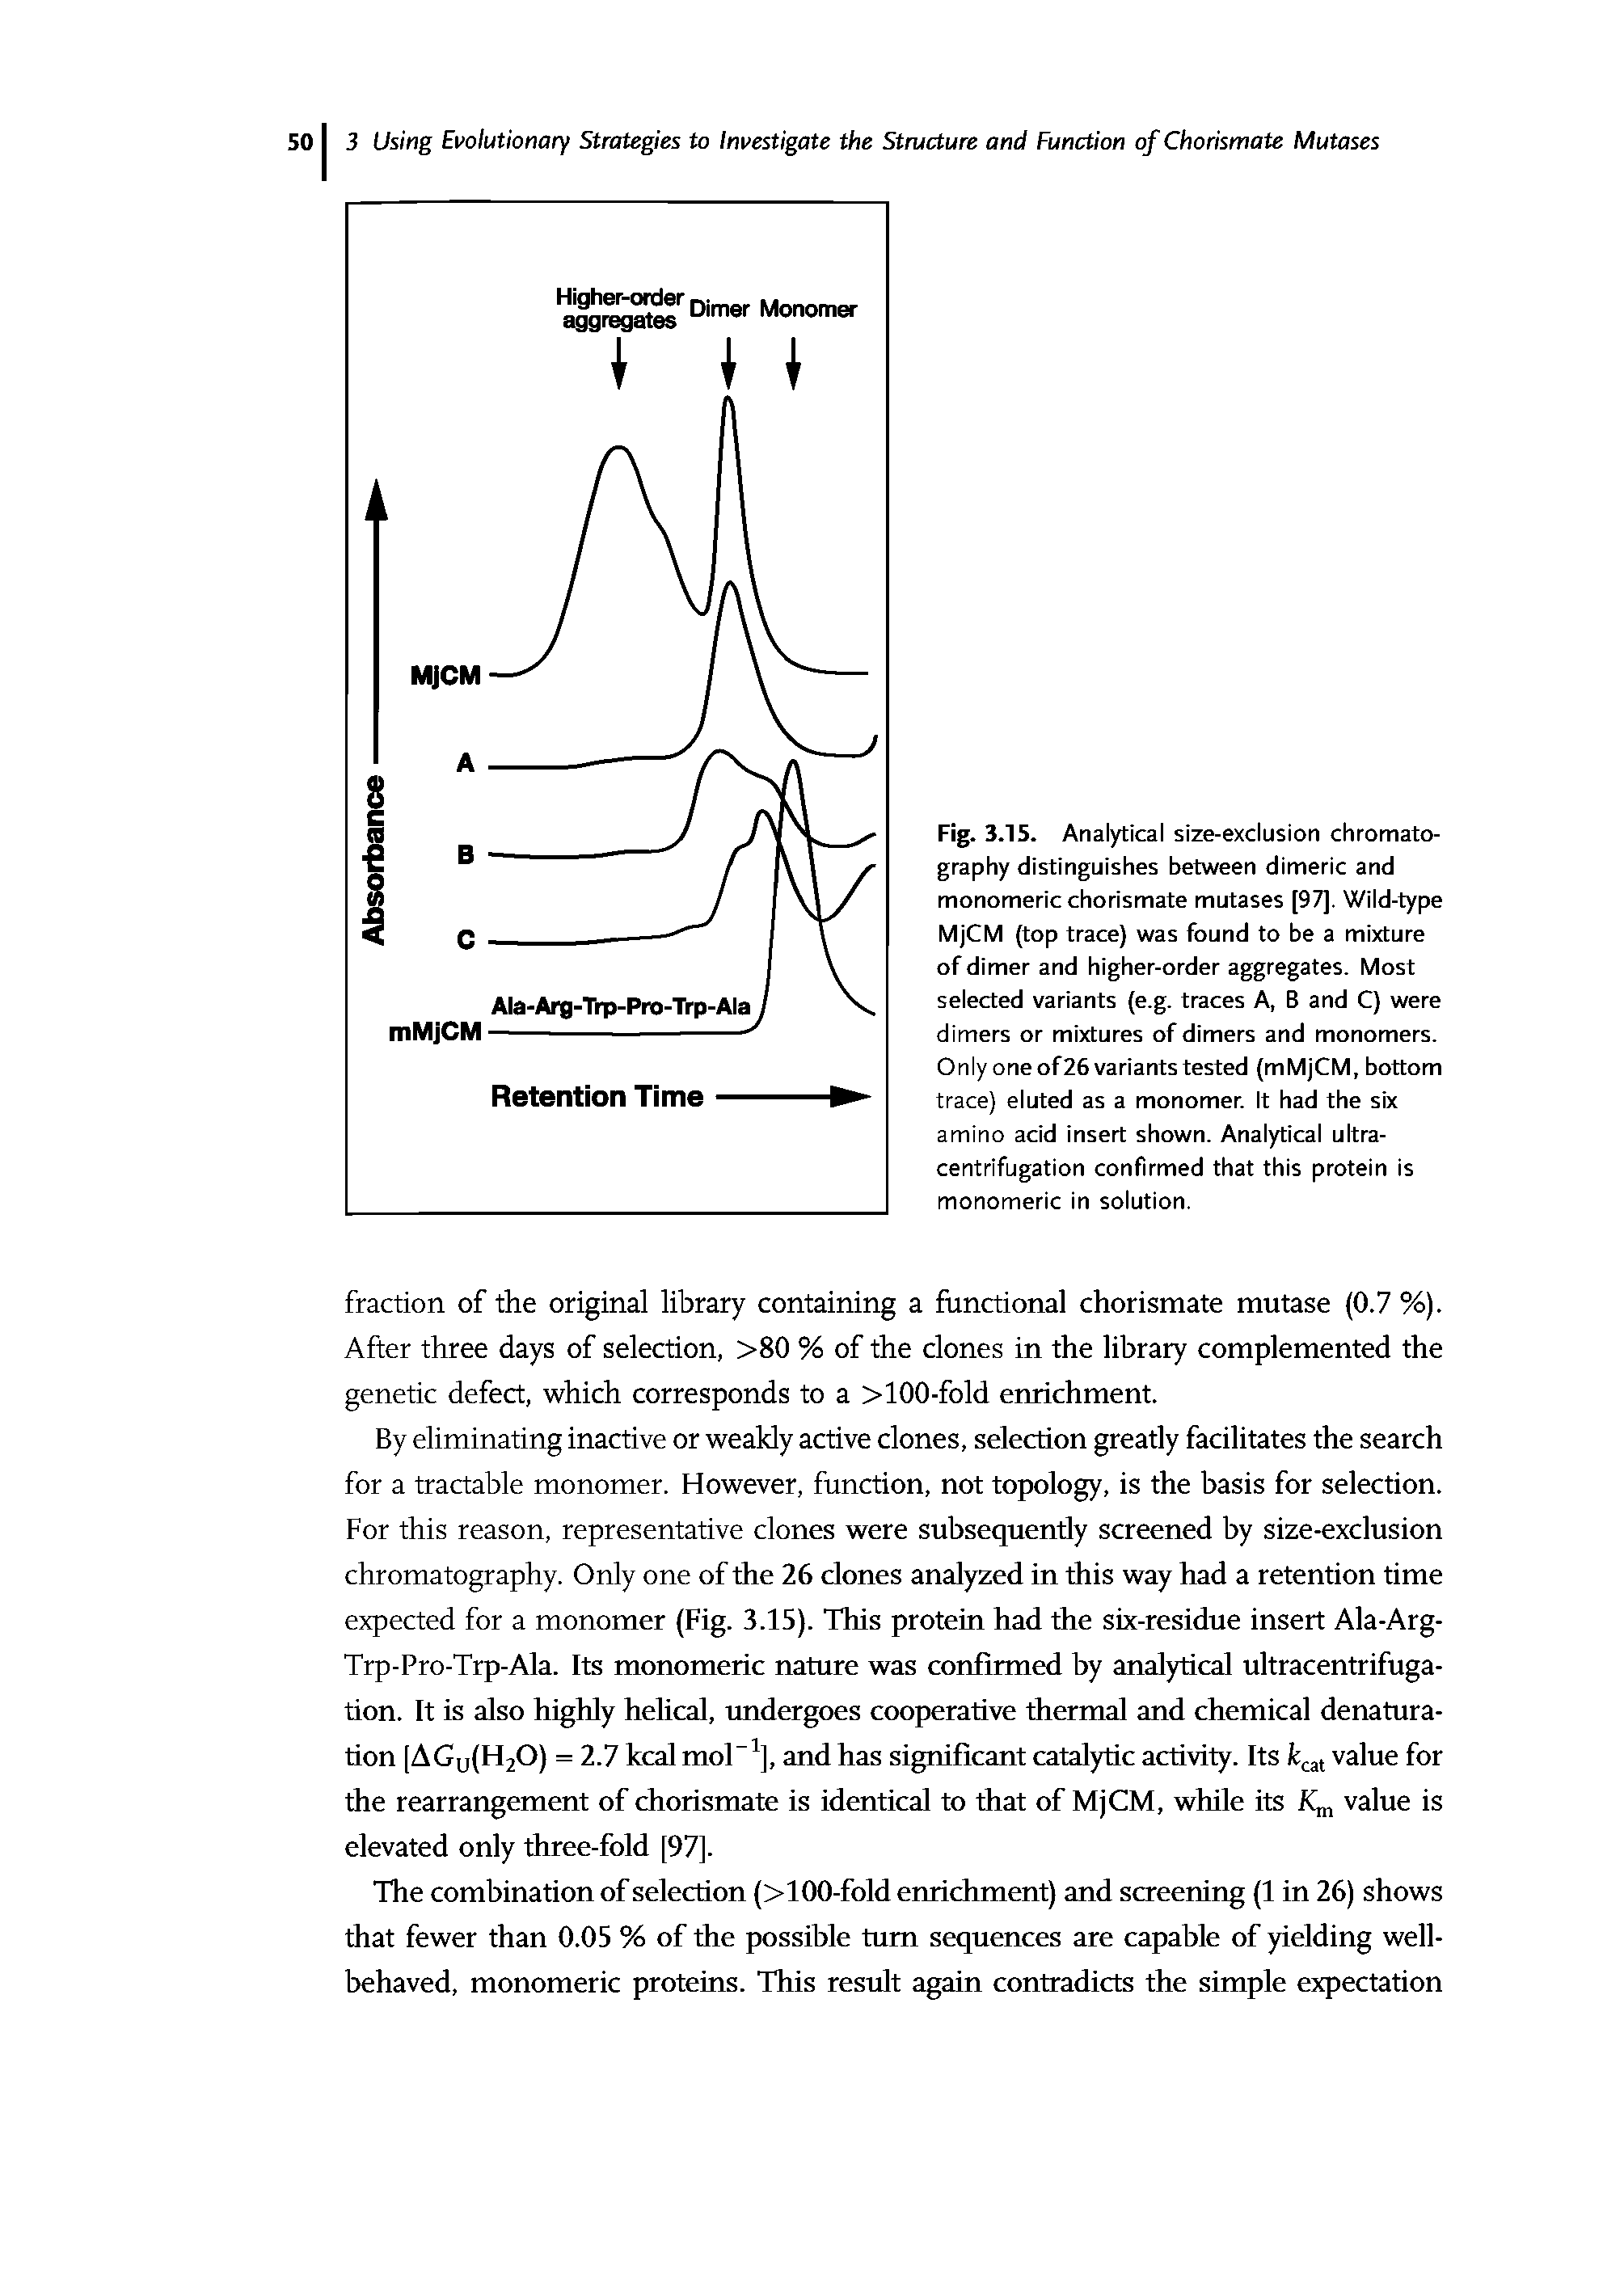 Fig. 3.15. Analytical size-exclusion chromatography distinguishes between dimeric and monomeric chorismate mutases [97]. Wild-type MjCM (top trace) was found to be a mixture of dimer and higher-order aggregates. Most selected variants (e.g. traces A, B and C) were dimers or mixtures of dimers and monomers. Only oneof26 variants tested (mMjCM, bottom trace) eluted as a monomer. It had the six amino acid insert shown. Analytical ultracentrifugation confirmed that this protein is monomeric in solution.